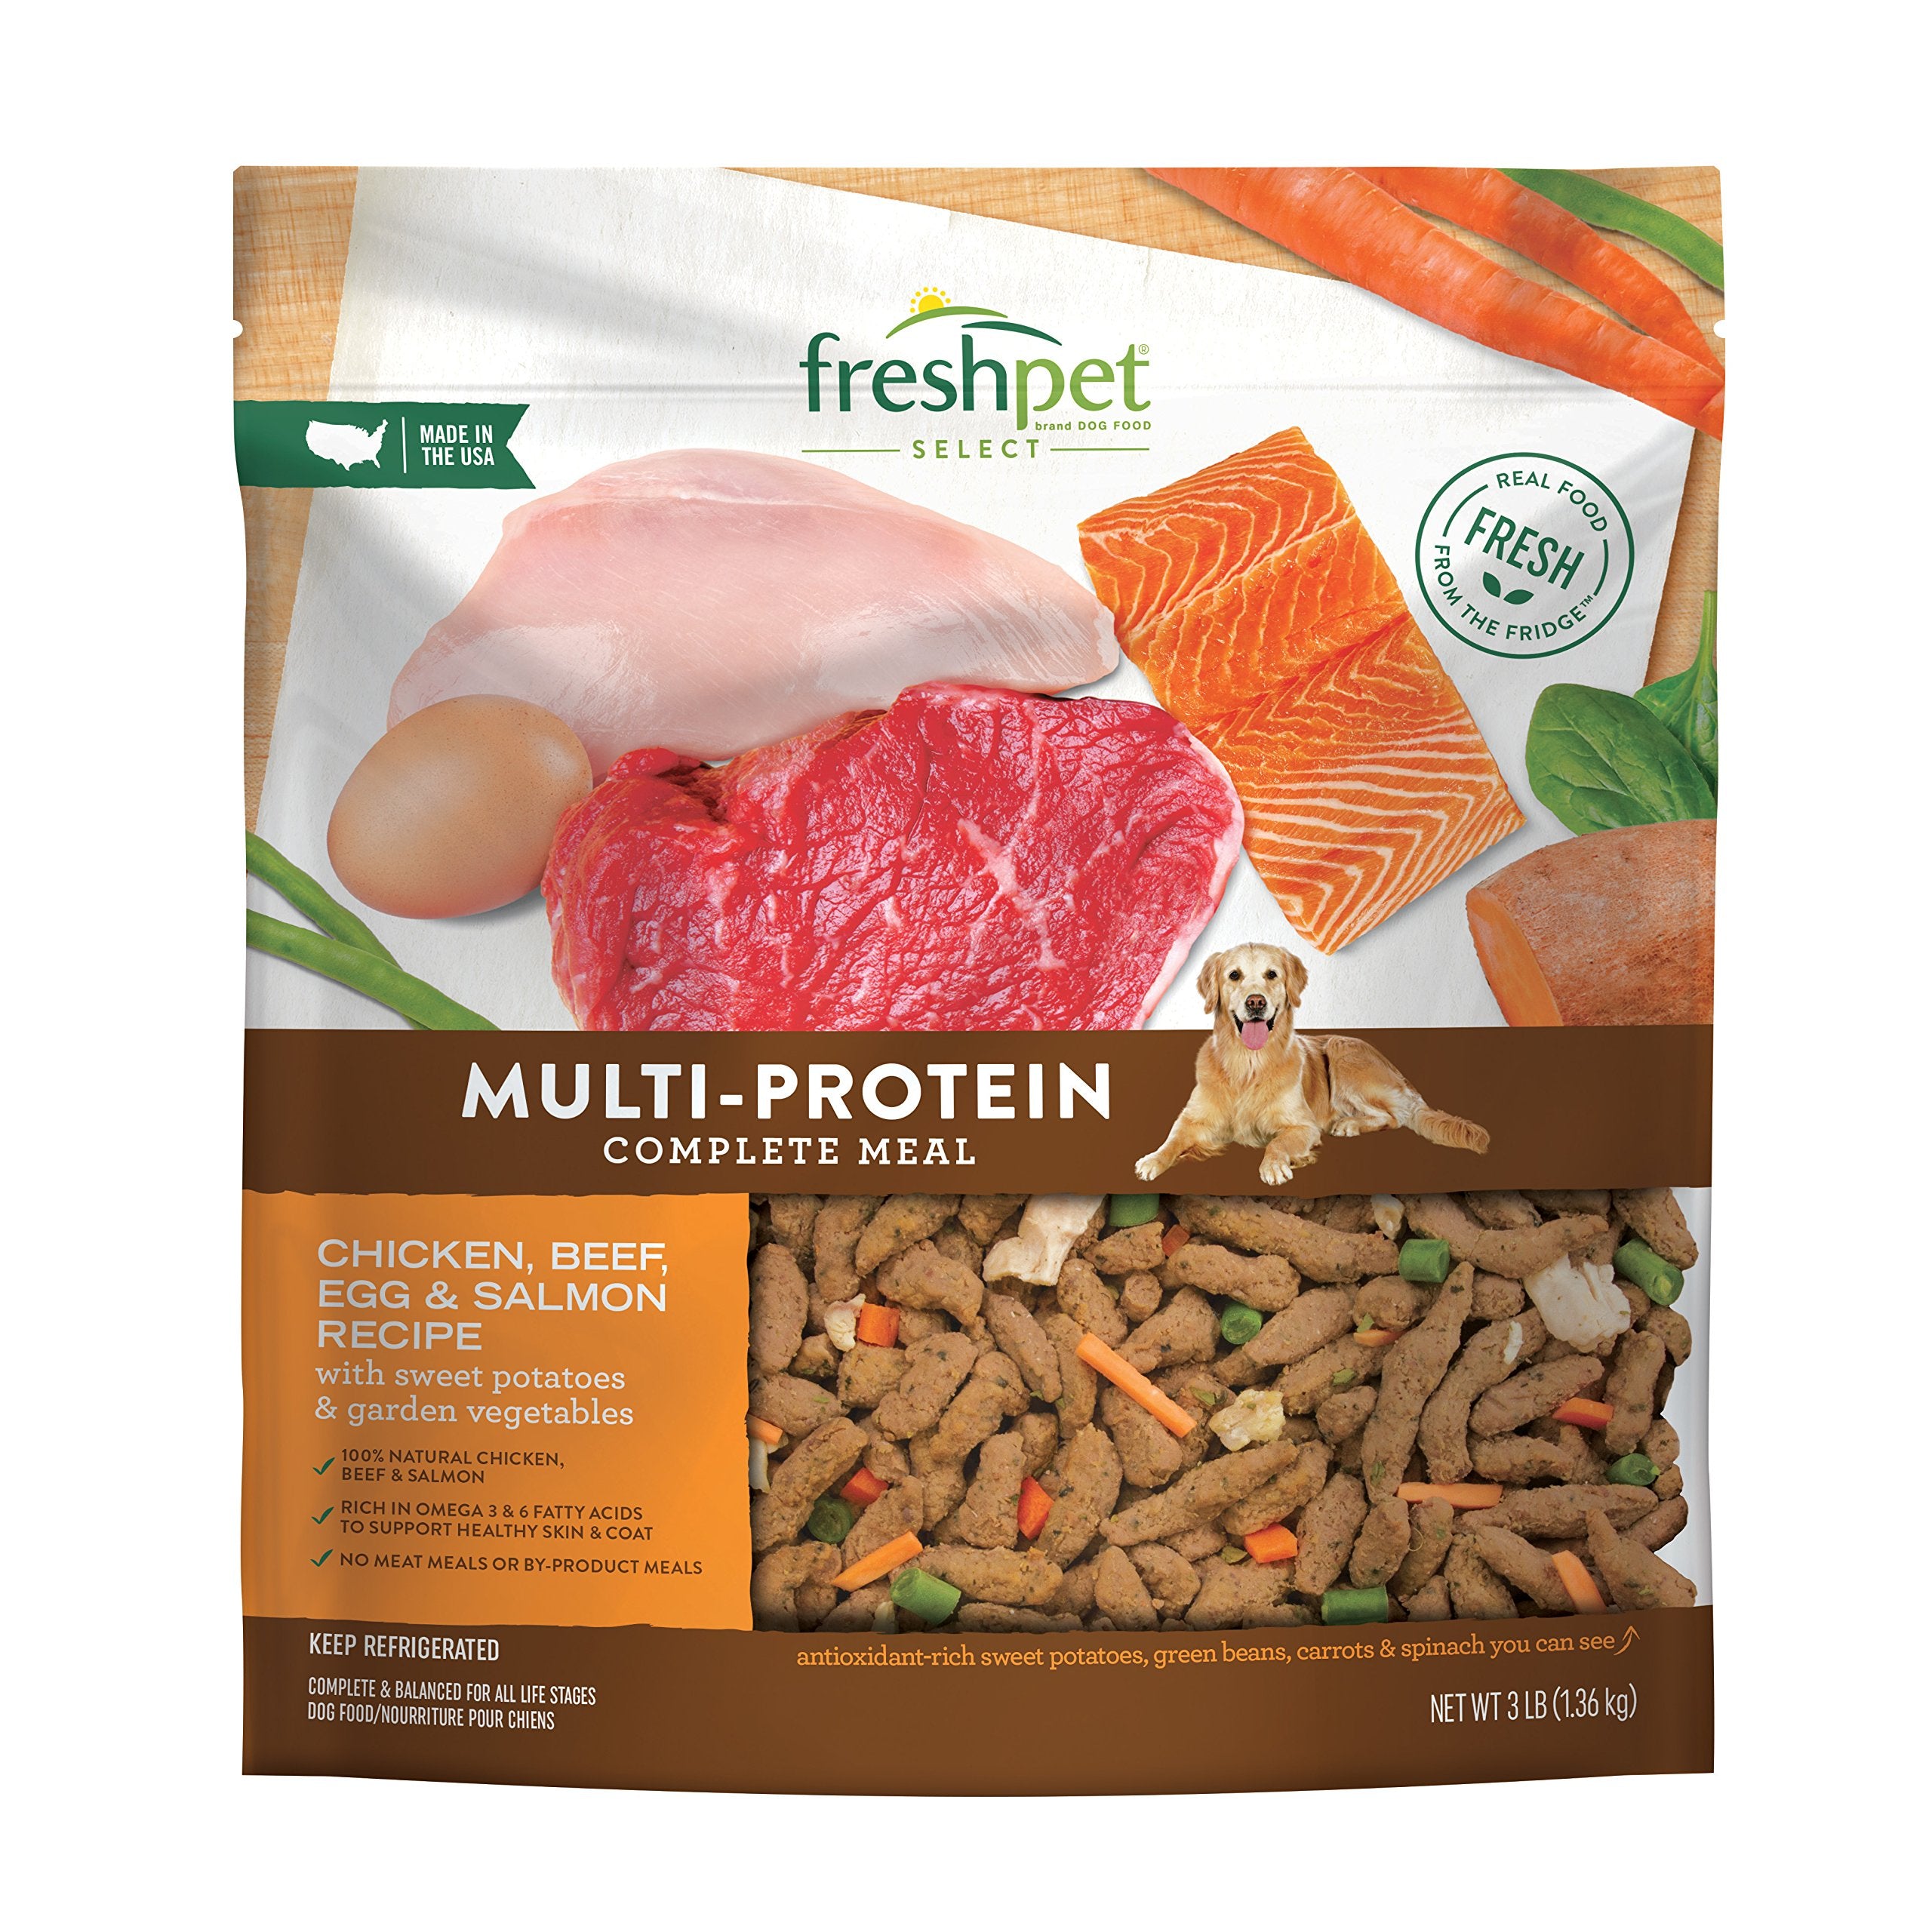 Freshpet Dog Food, Multi-Protein Complete Meal, Chicken, Beef, Egg and Salmon Recipe, 3Lb